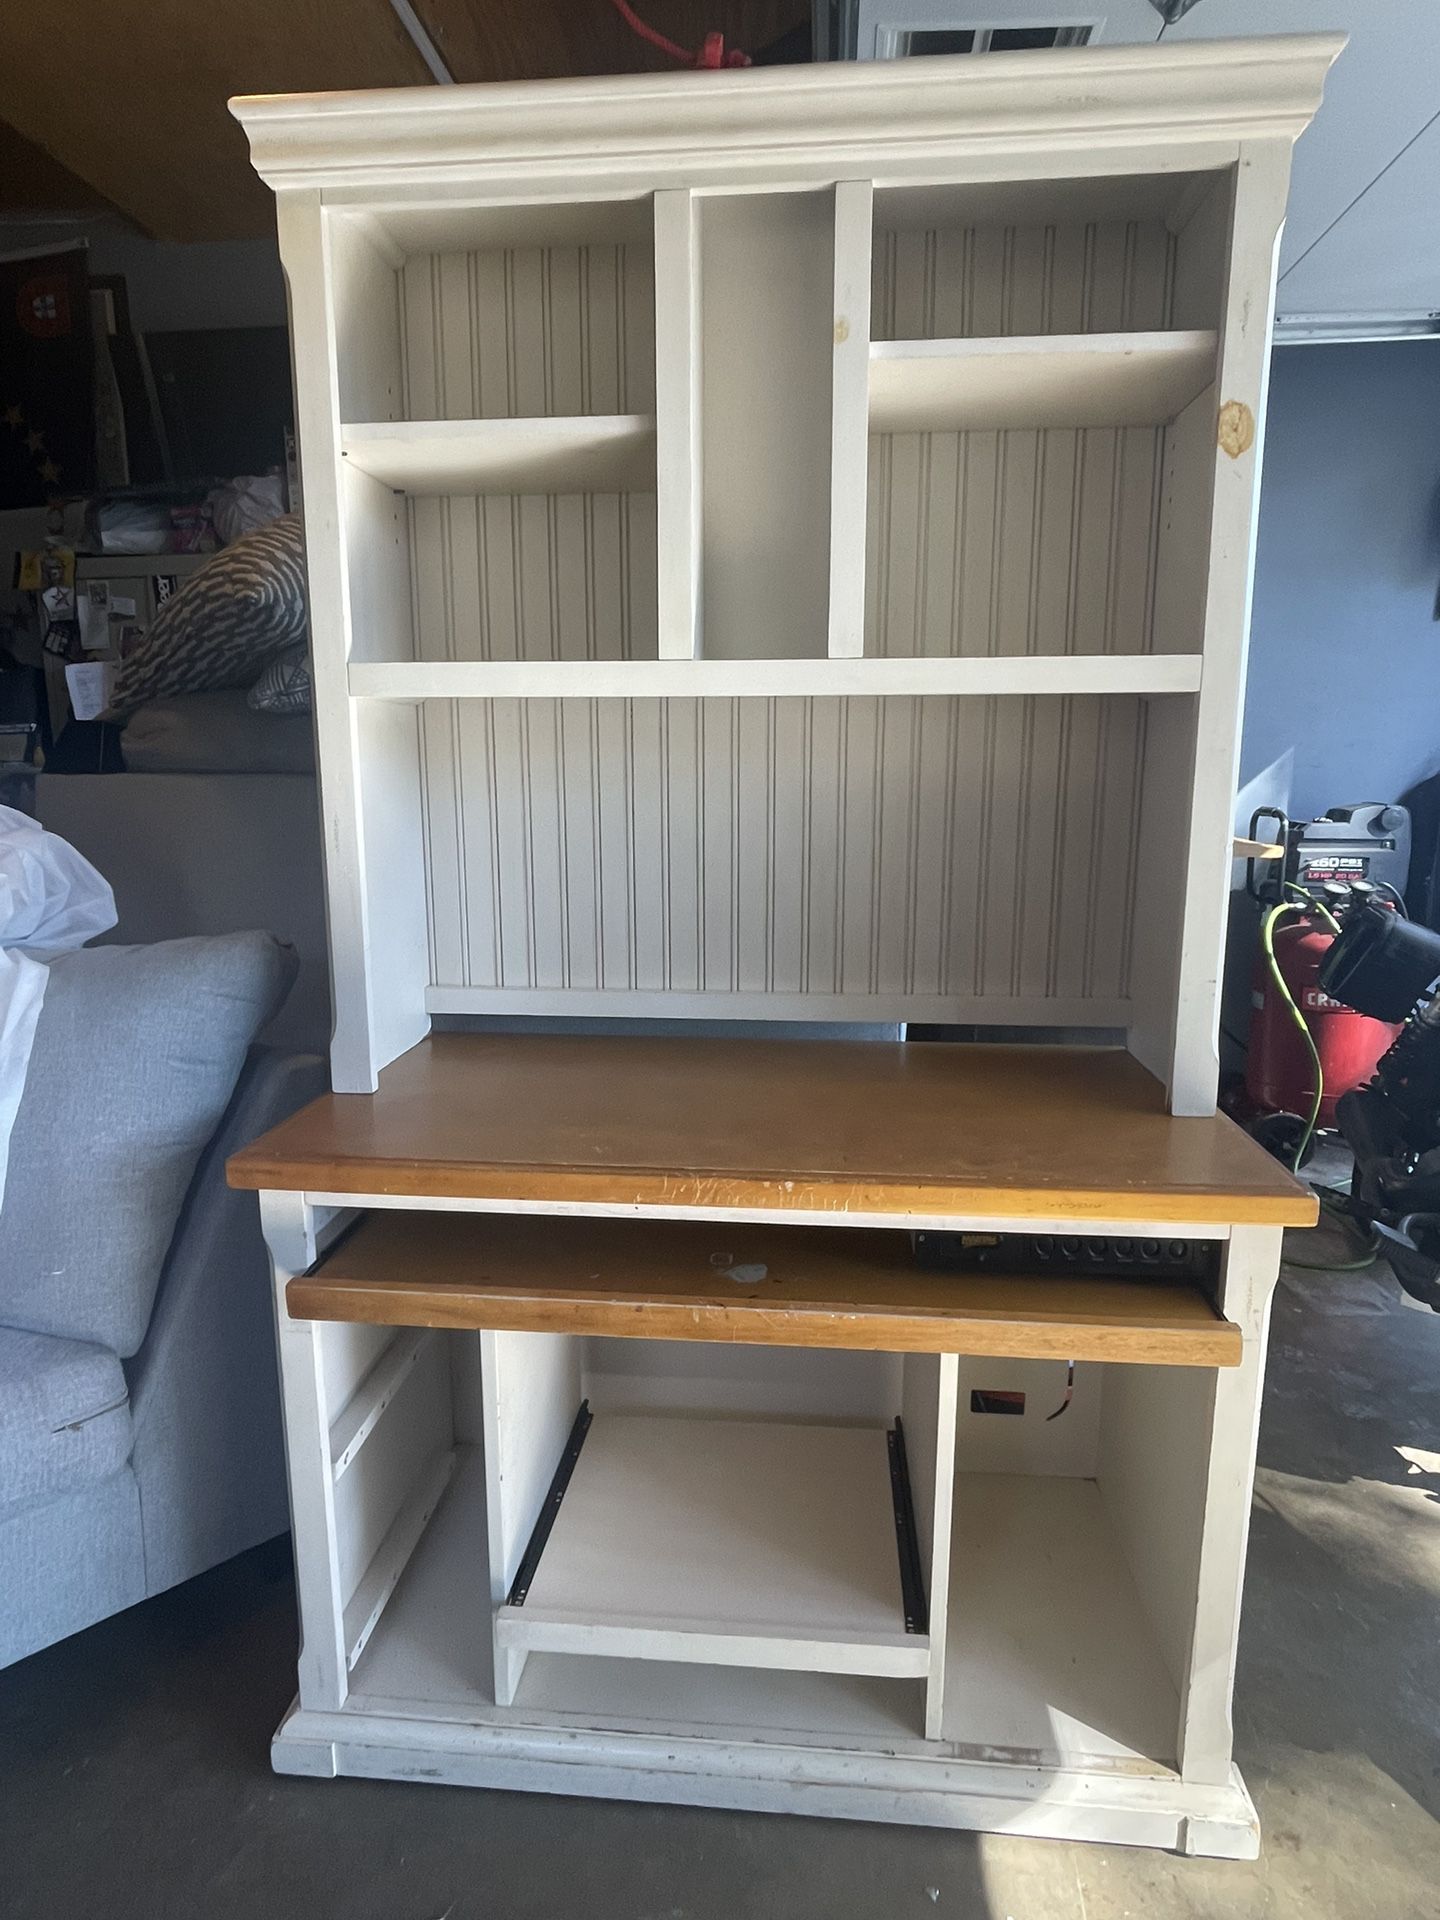 Must Go! Perfect For Small Spaces! Pottery Barn Solid Wood Computer Desk with Hutch